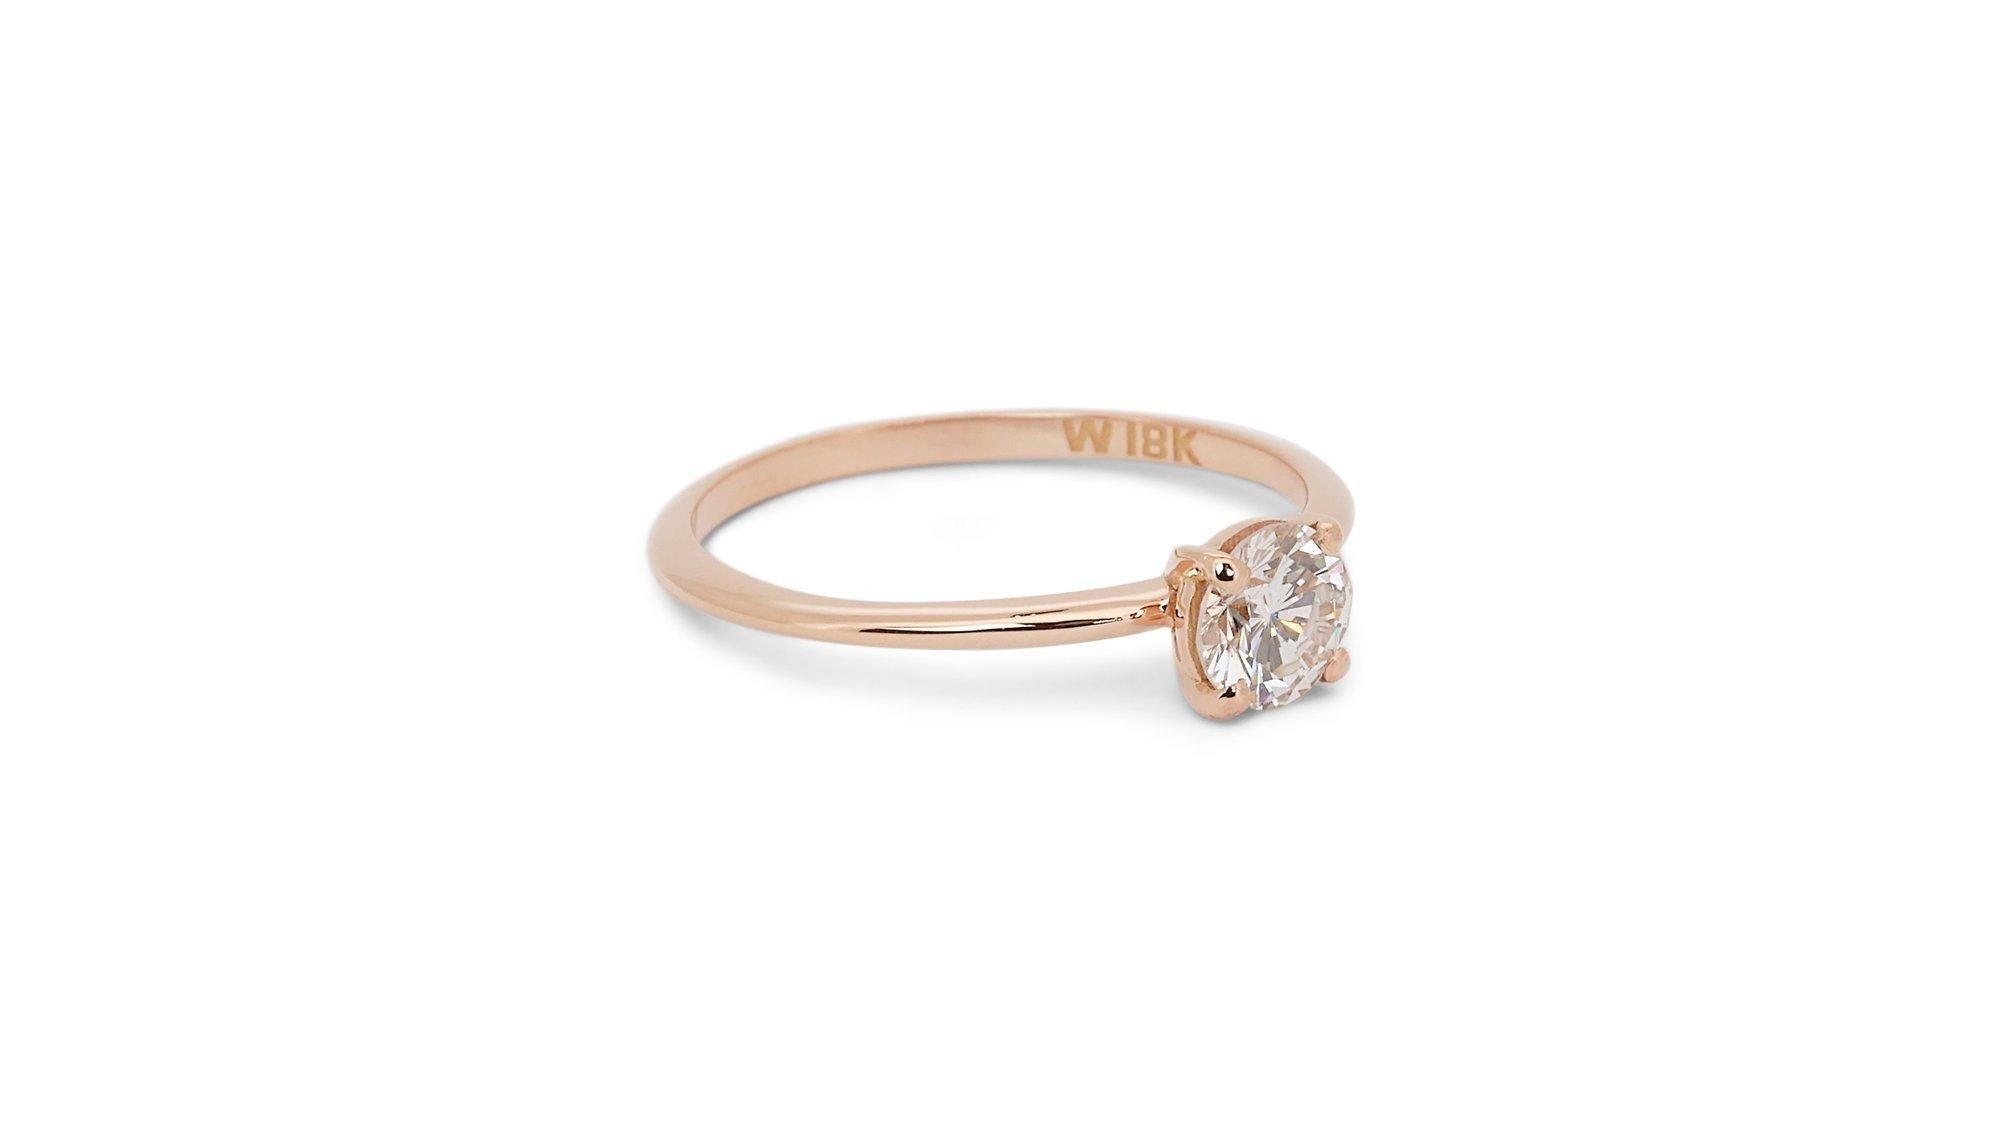 Round Cut Timeless 0.80ct Diamond Solitaire Ring in 18k Rose Gold - GIA Certified For Sale